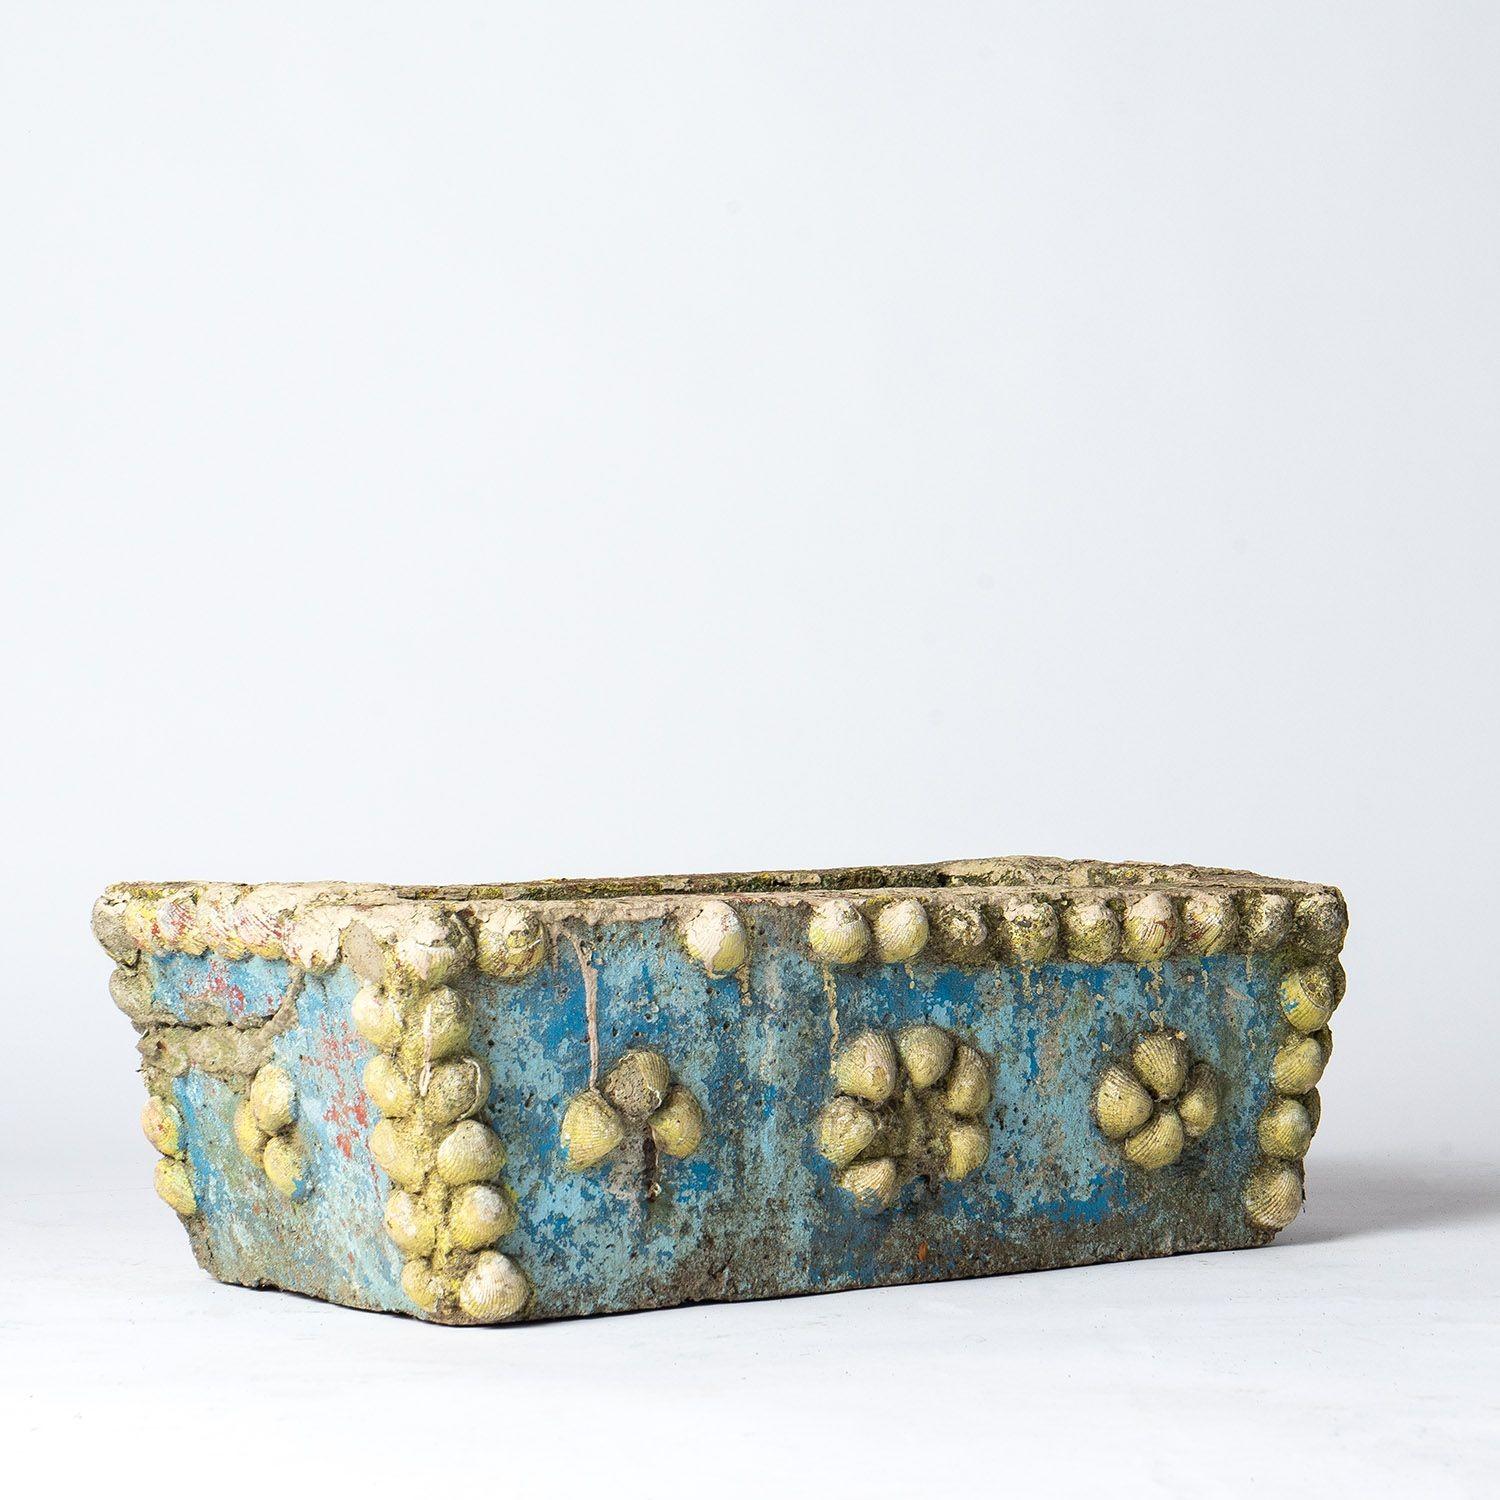 Vintage French Painted Cast Stone Sea Shell Planter Jardiniere, c.1950s  In Fair Condition For Sale In Bristol, GB